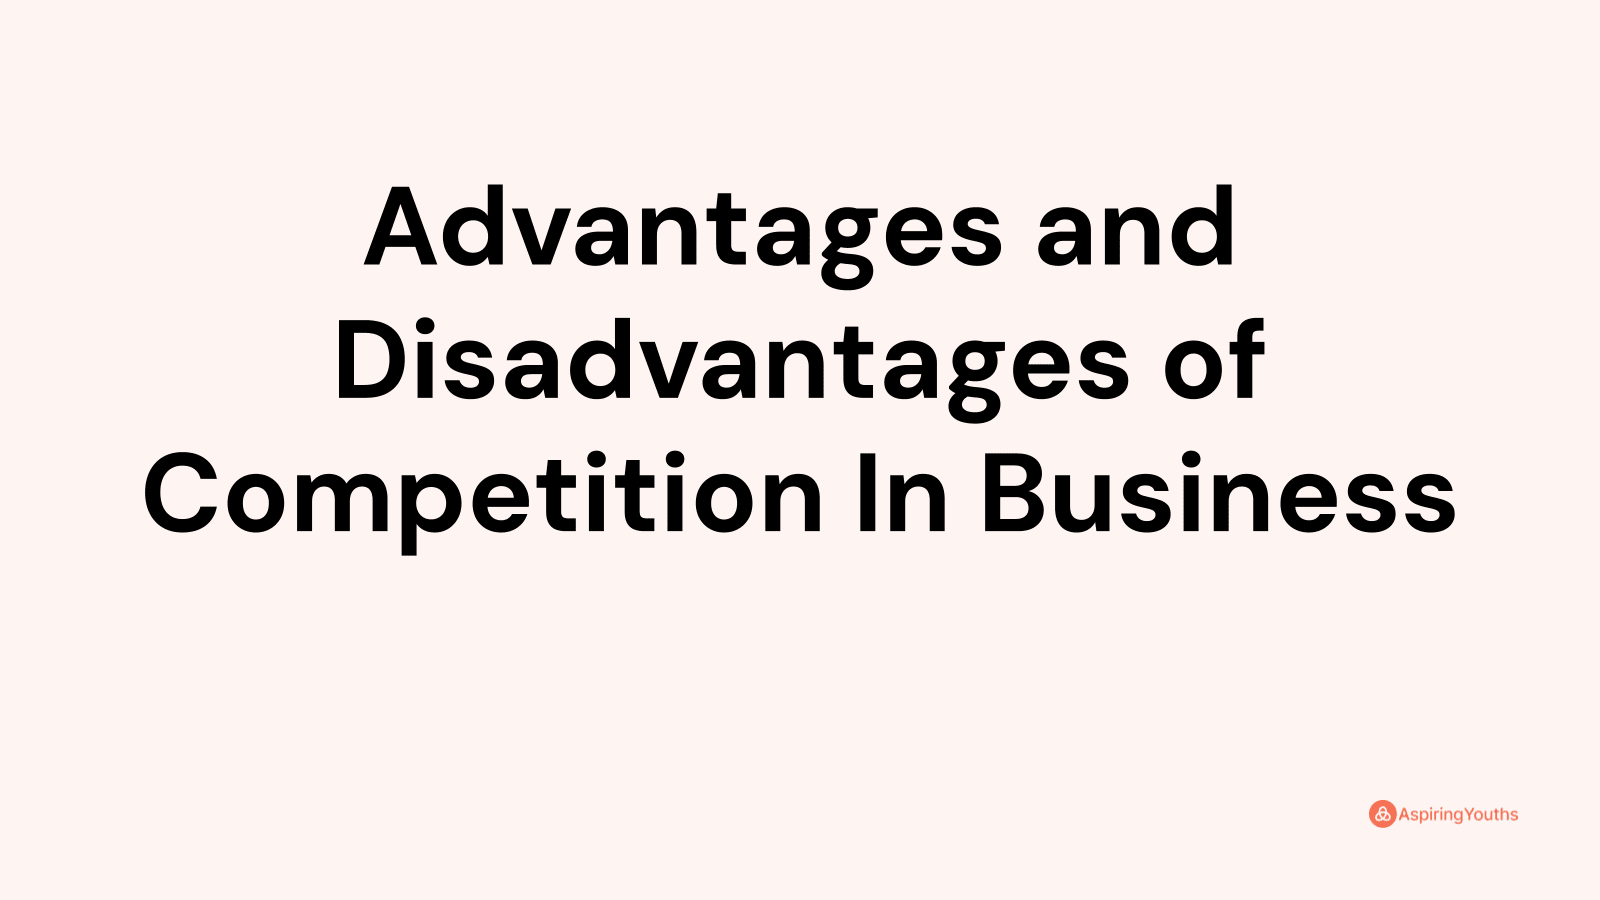 Advantages and disadvantages of Competition In Business